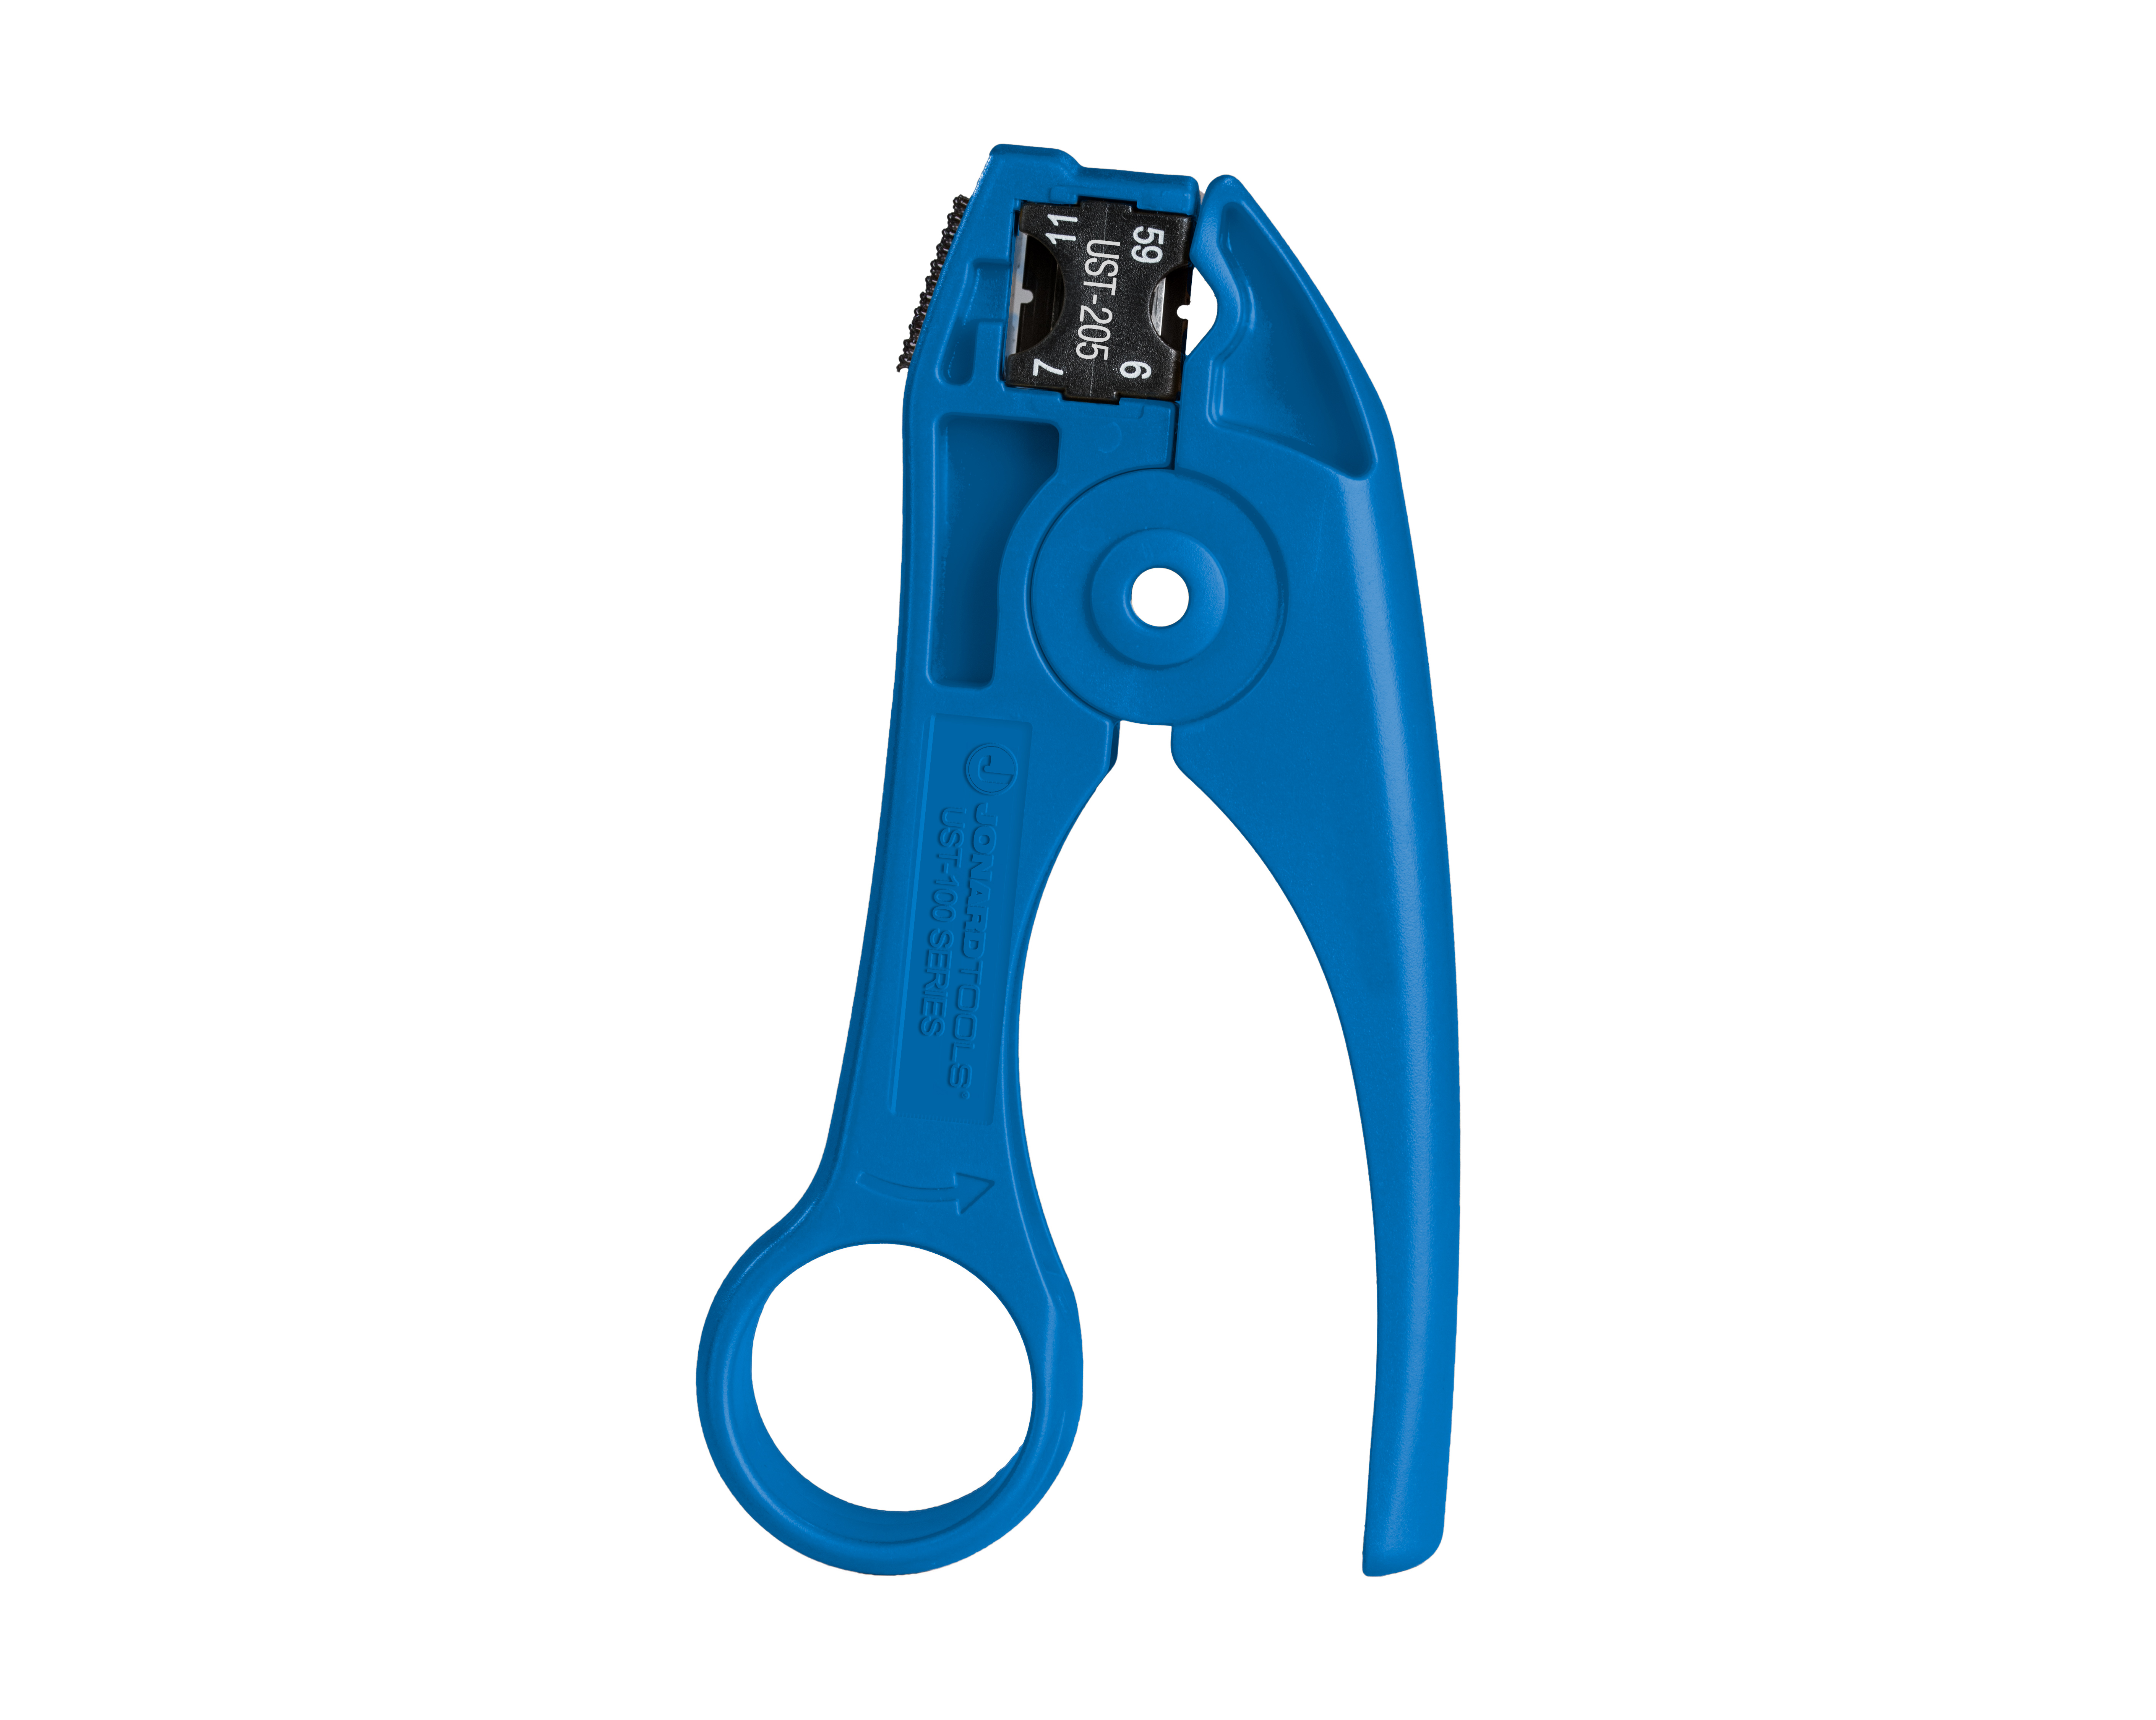 Coax Coaxial Cable Wire Cutter Stripping Tool RG59/RG6/Quad RG58 Stripper V7V0 